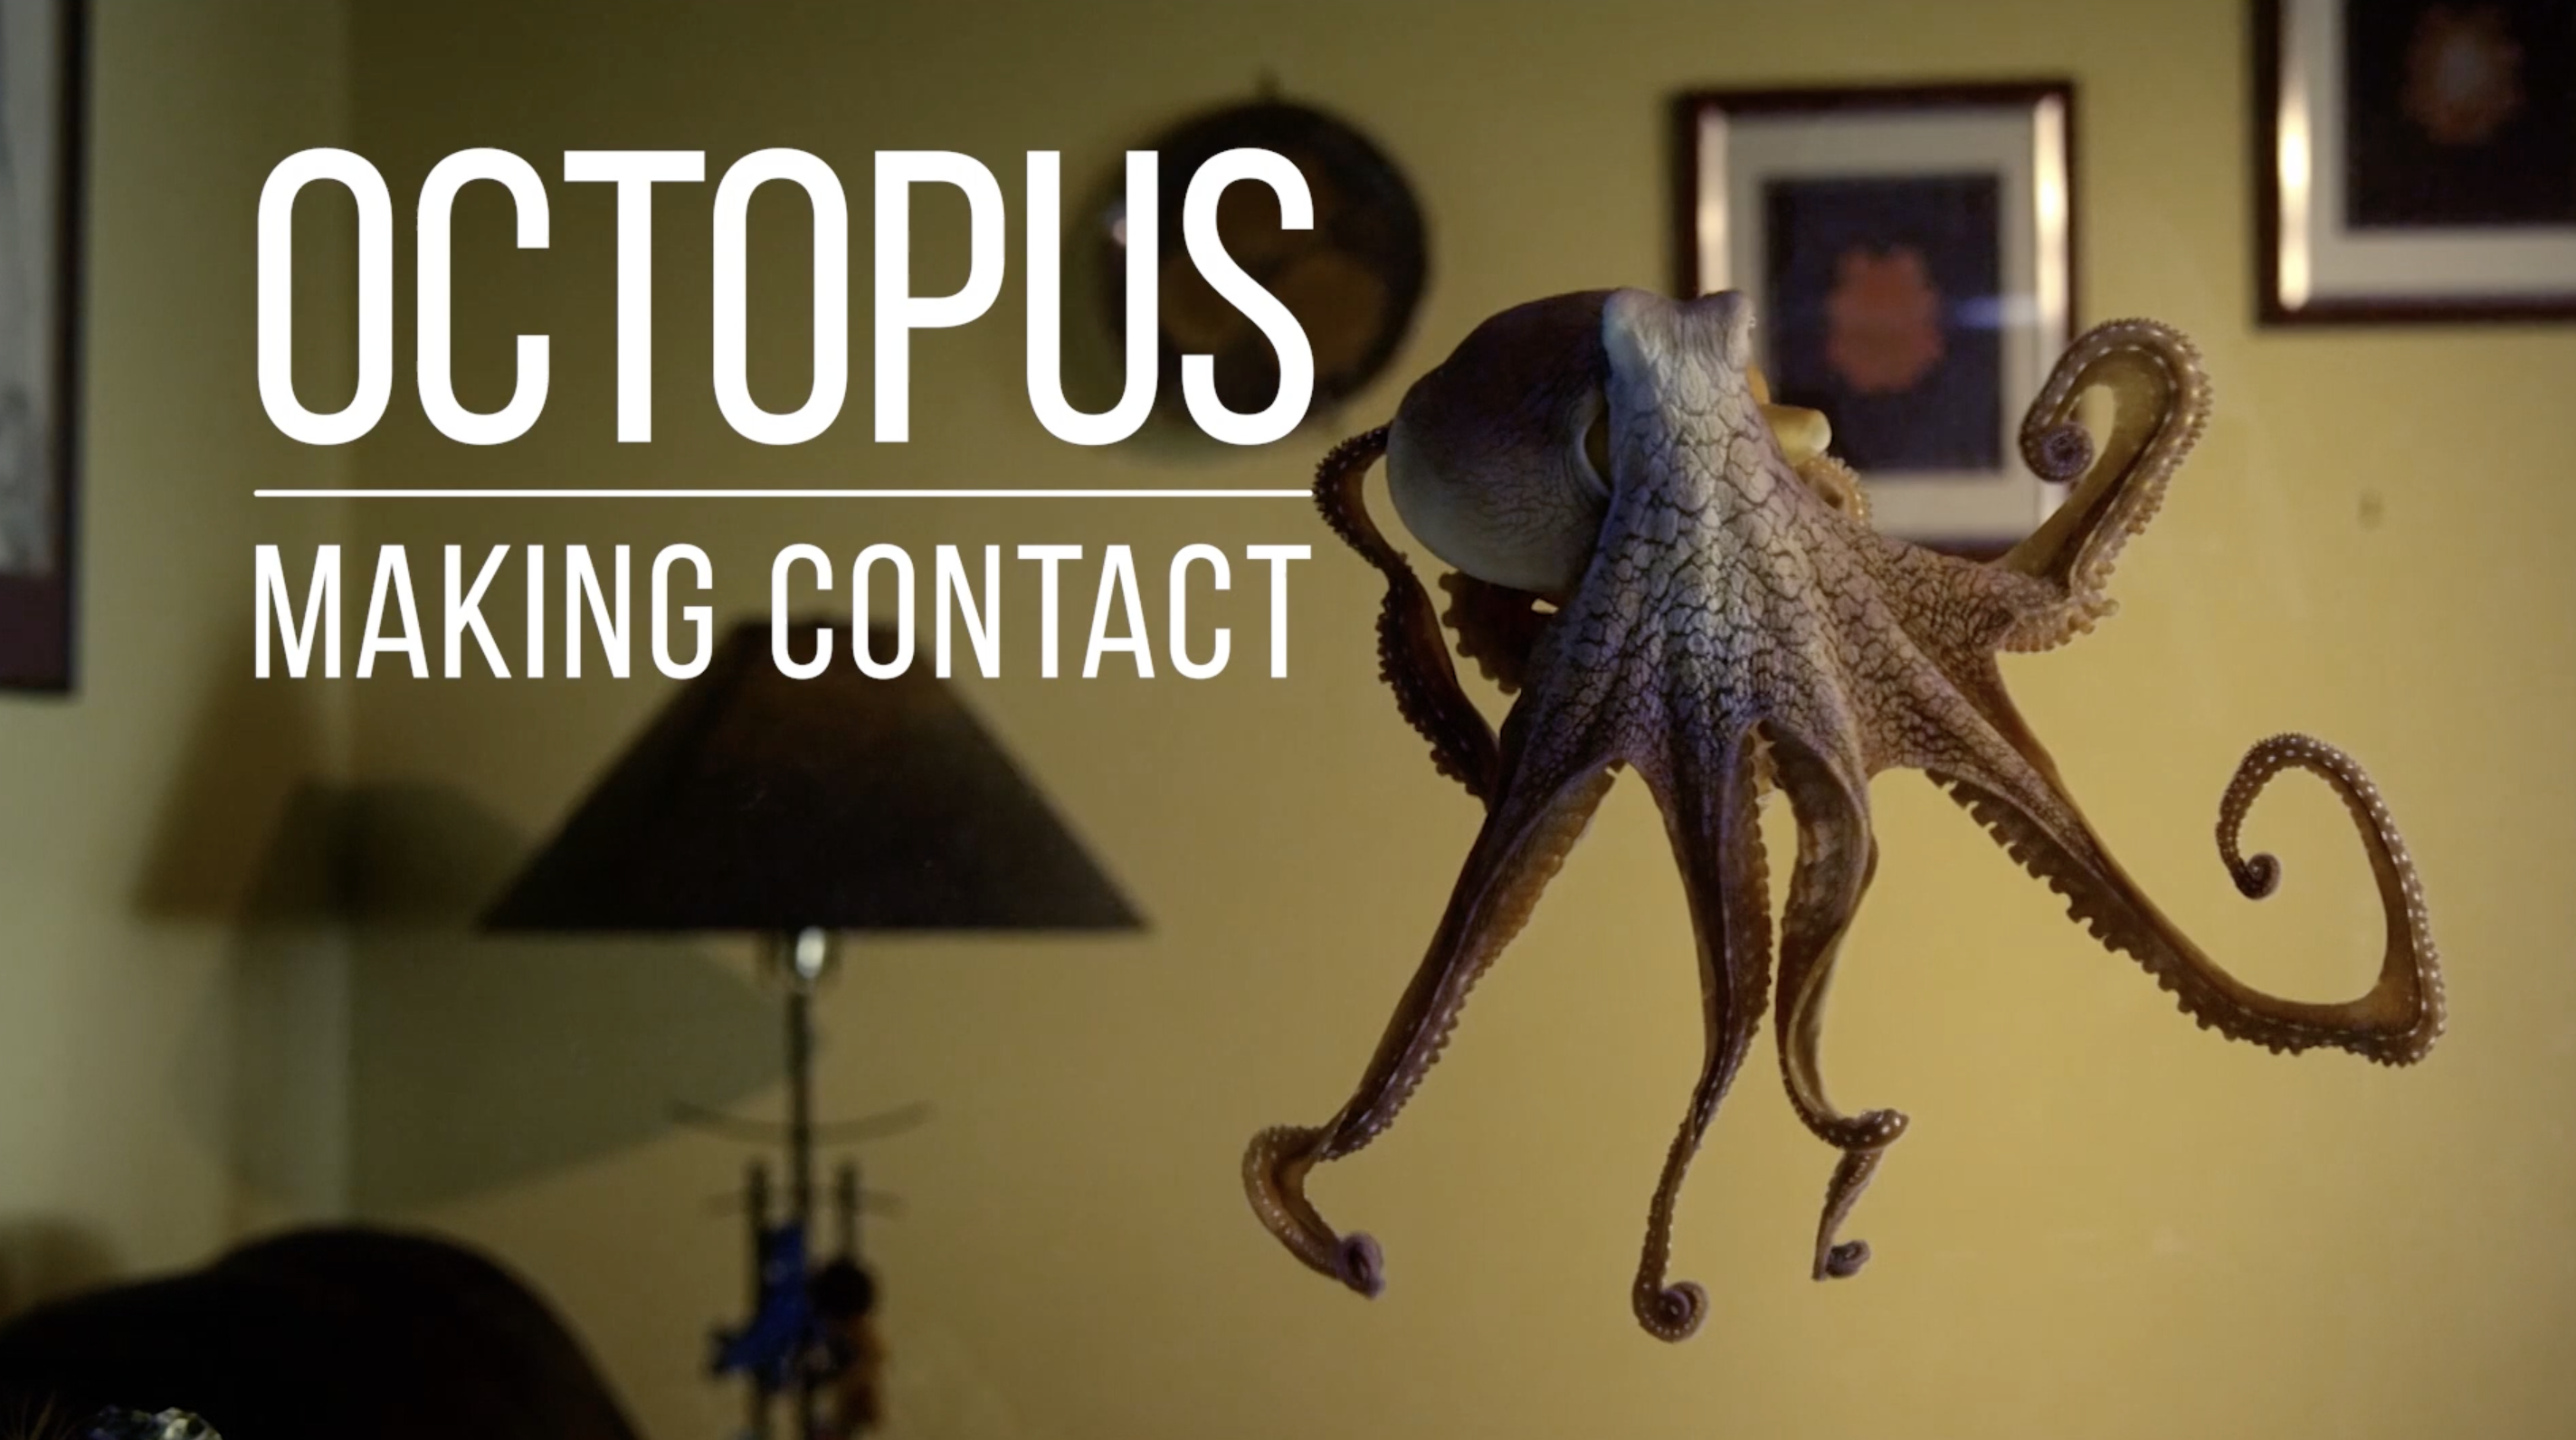 NATURE <br/>Octopus: Making Contact